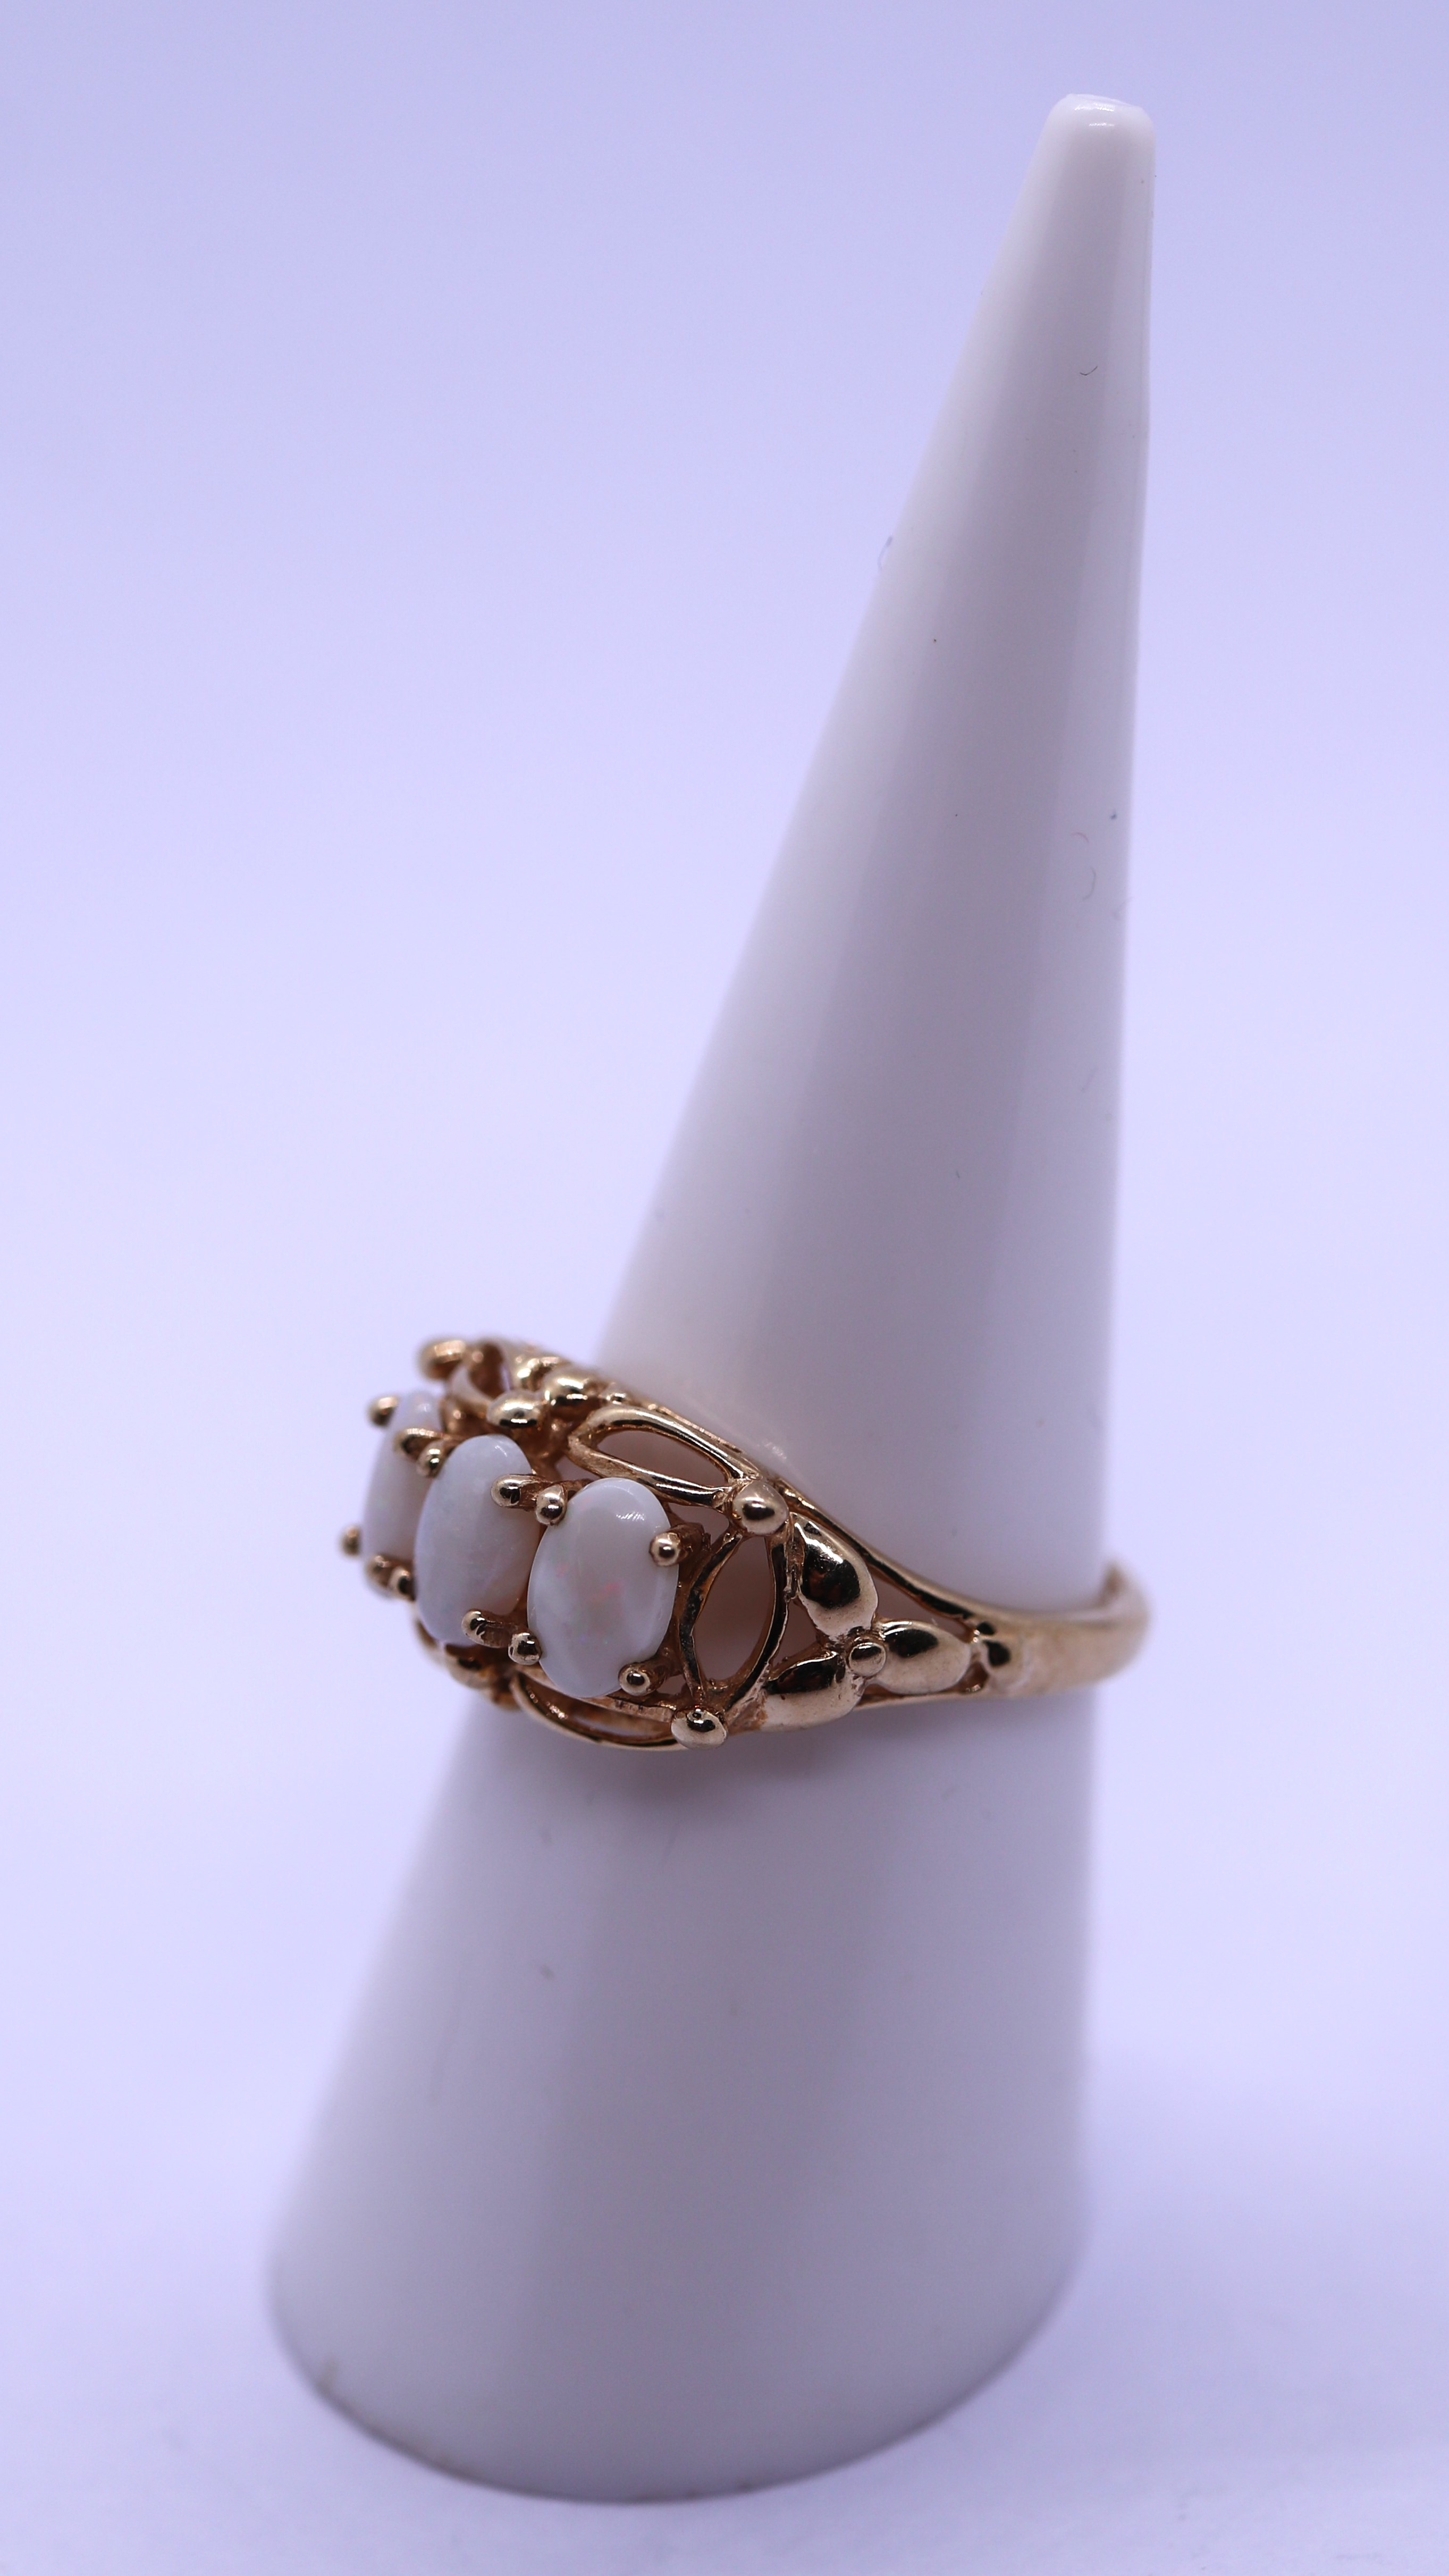 9ct gold 3 stone opal ring - Size M - Image 2 of 3